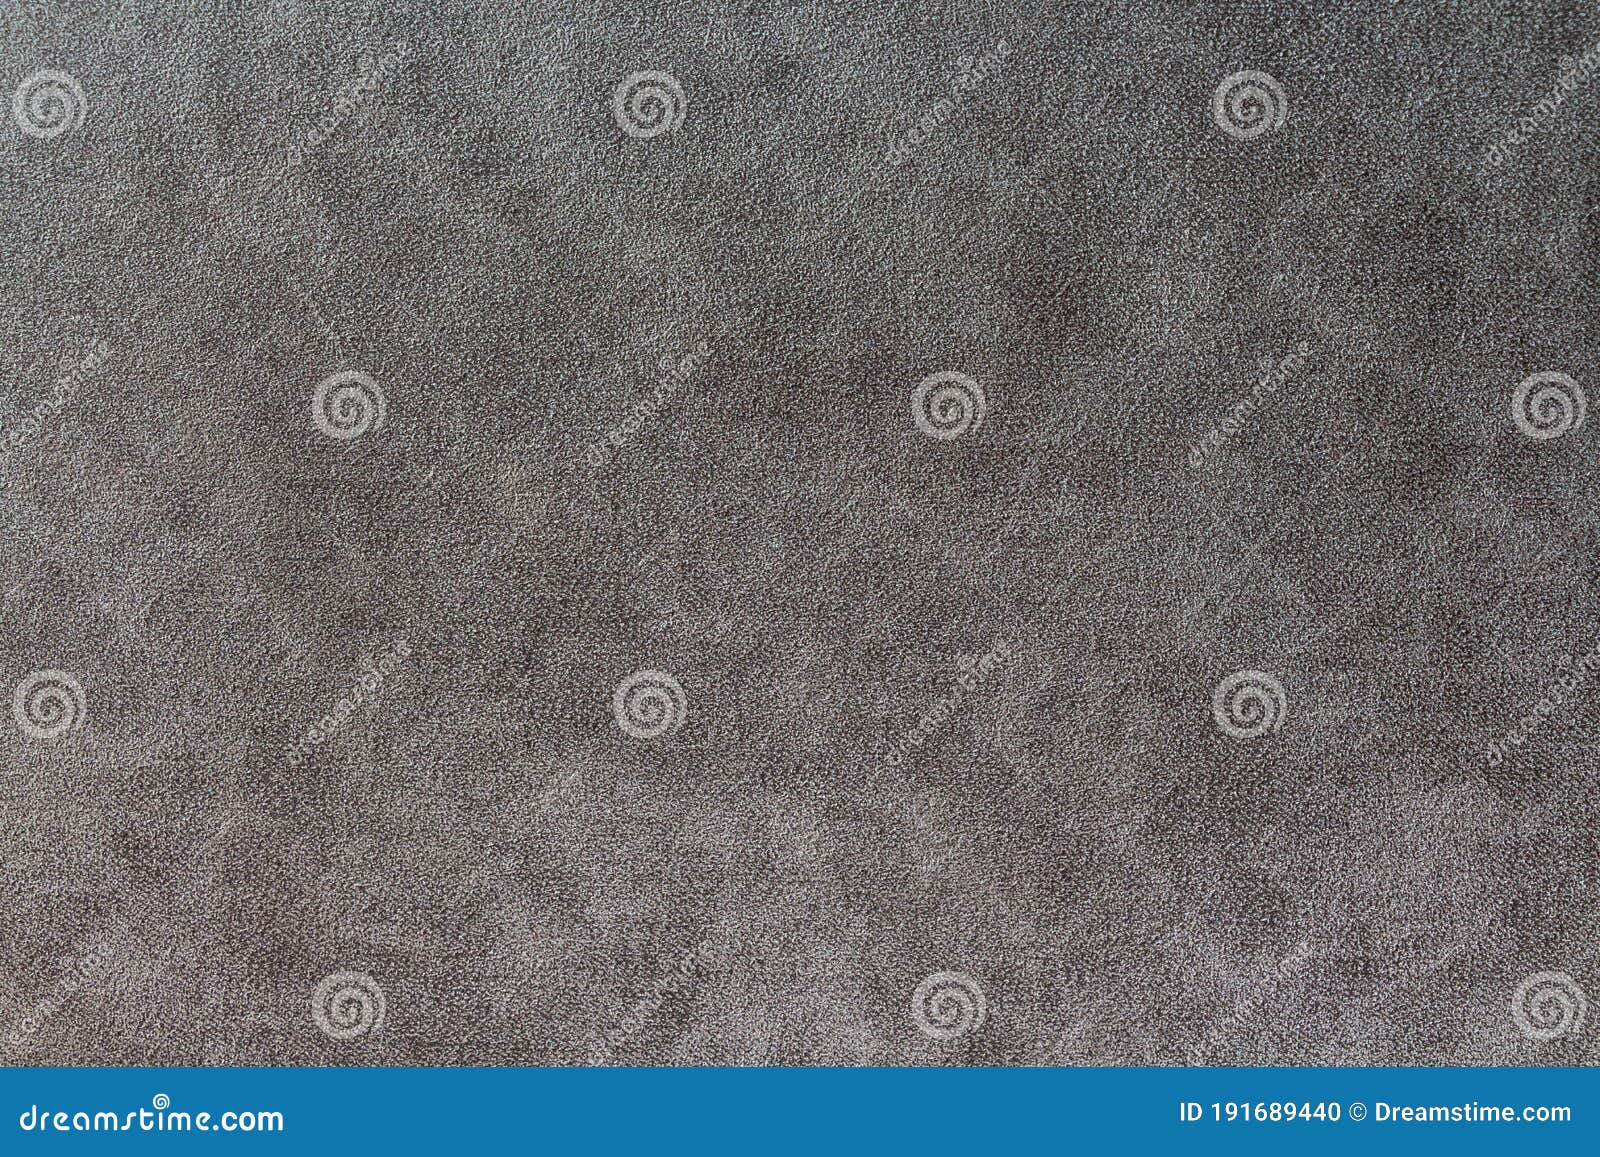 Dark Grey Suede Fabric Background. Stock Photo - Image of abstract ...